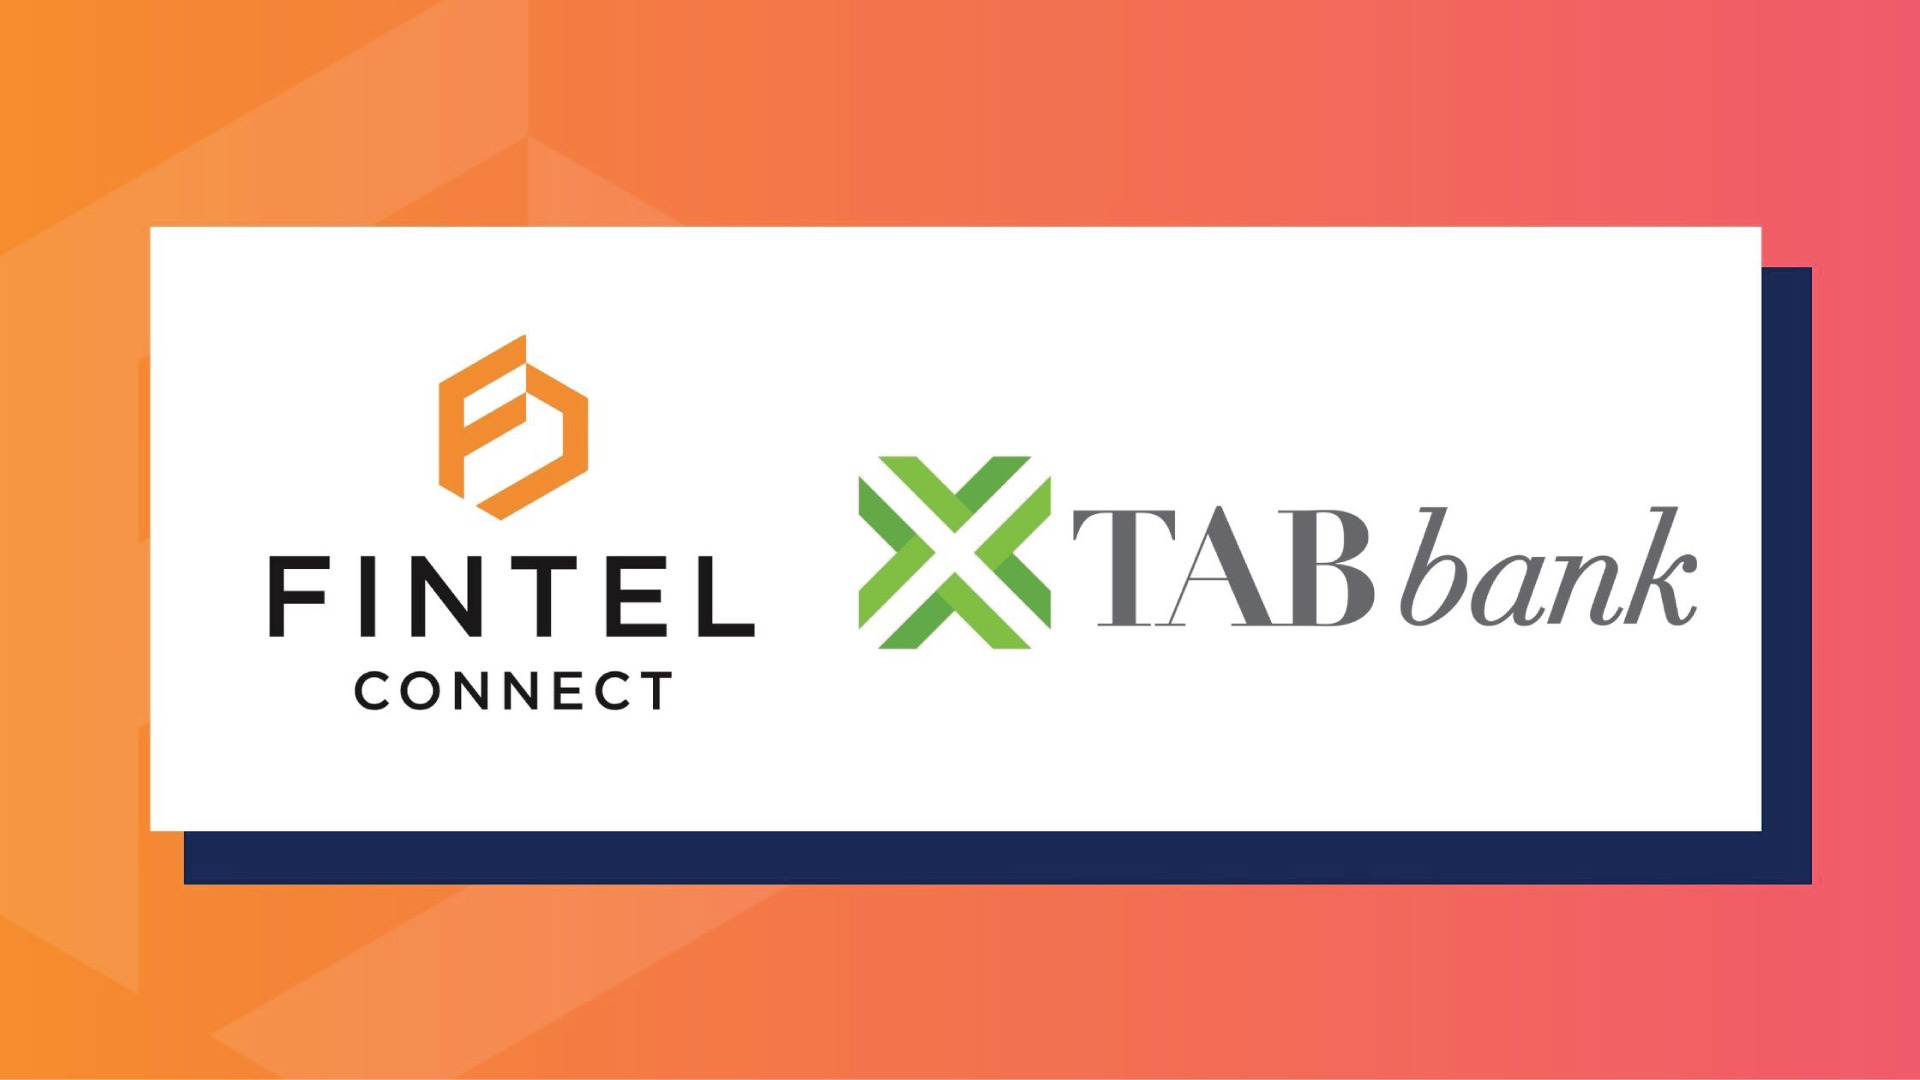 Fintel Connect Announces Strategic Partnership with TAB Bank to Expand Reach to Underserved Communities